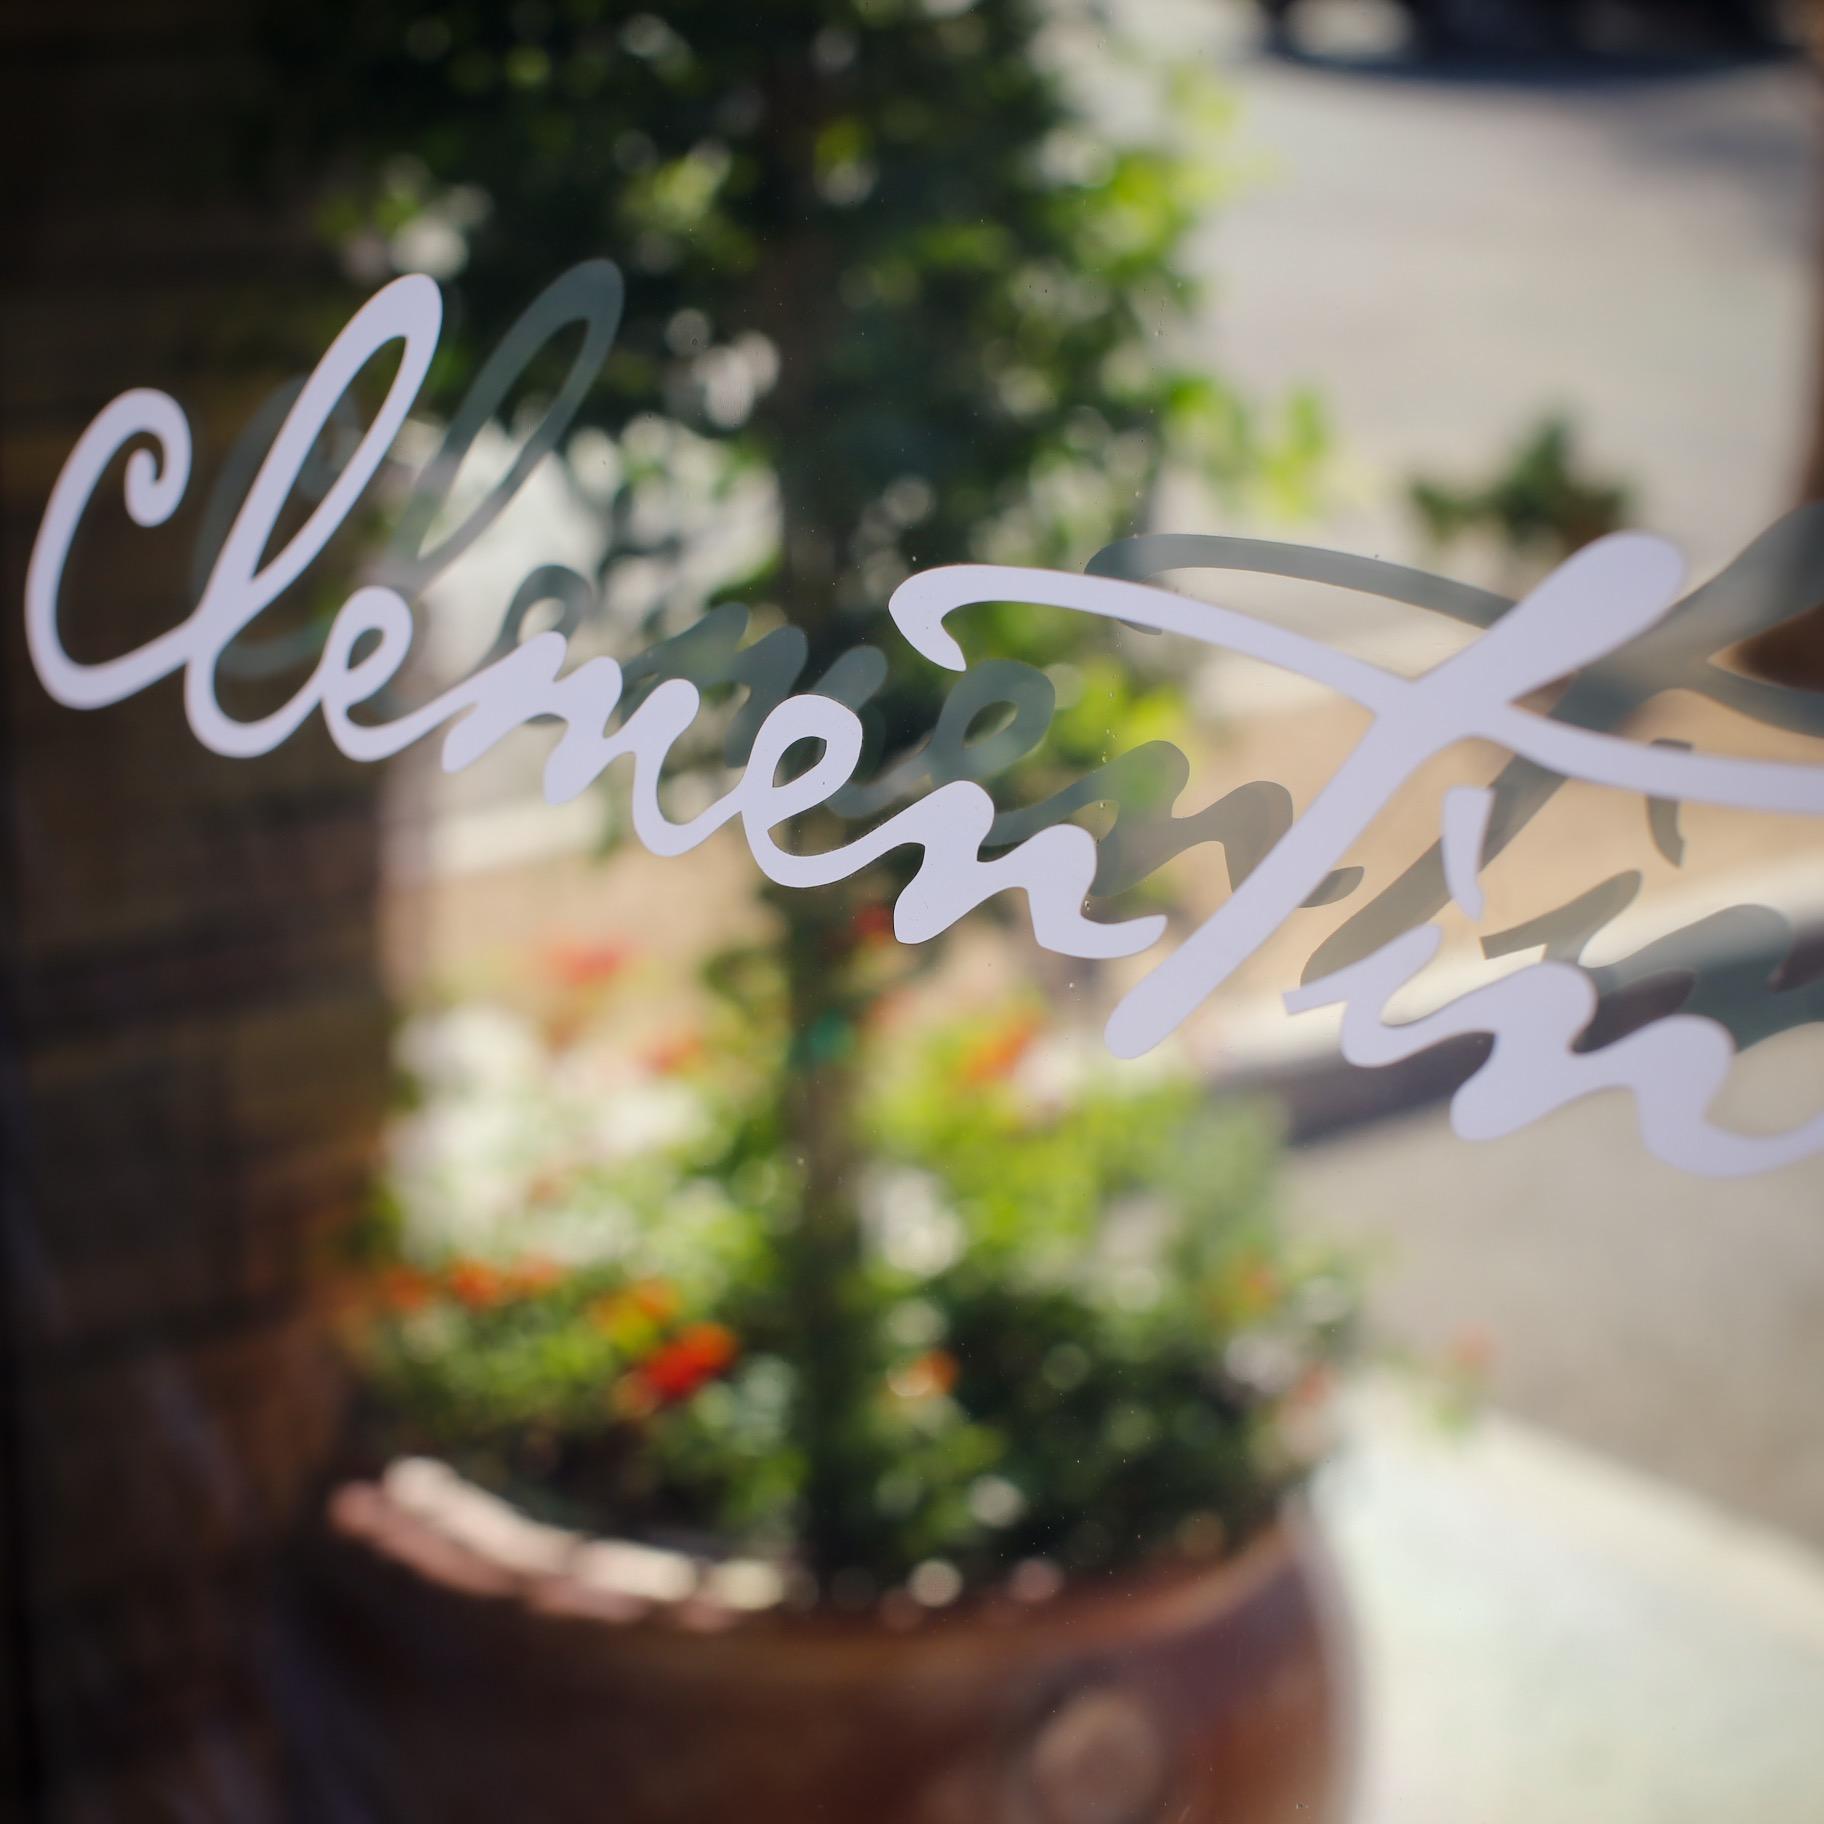 “One standout restaurant in the world of deli-meets-serious restaurant-meets ambience is the charming Mediterranean influenced Clementine Gourmet.